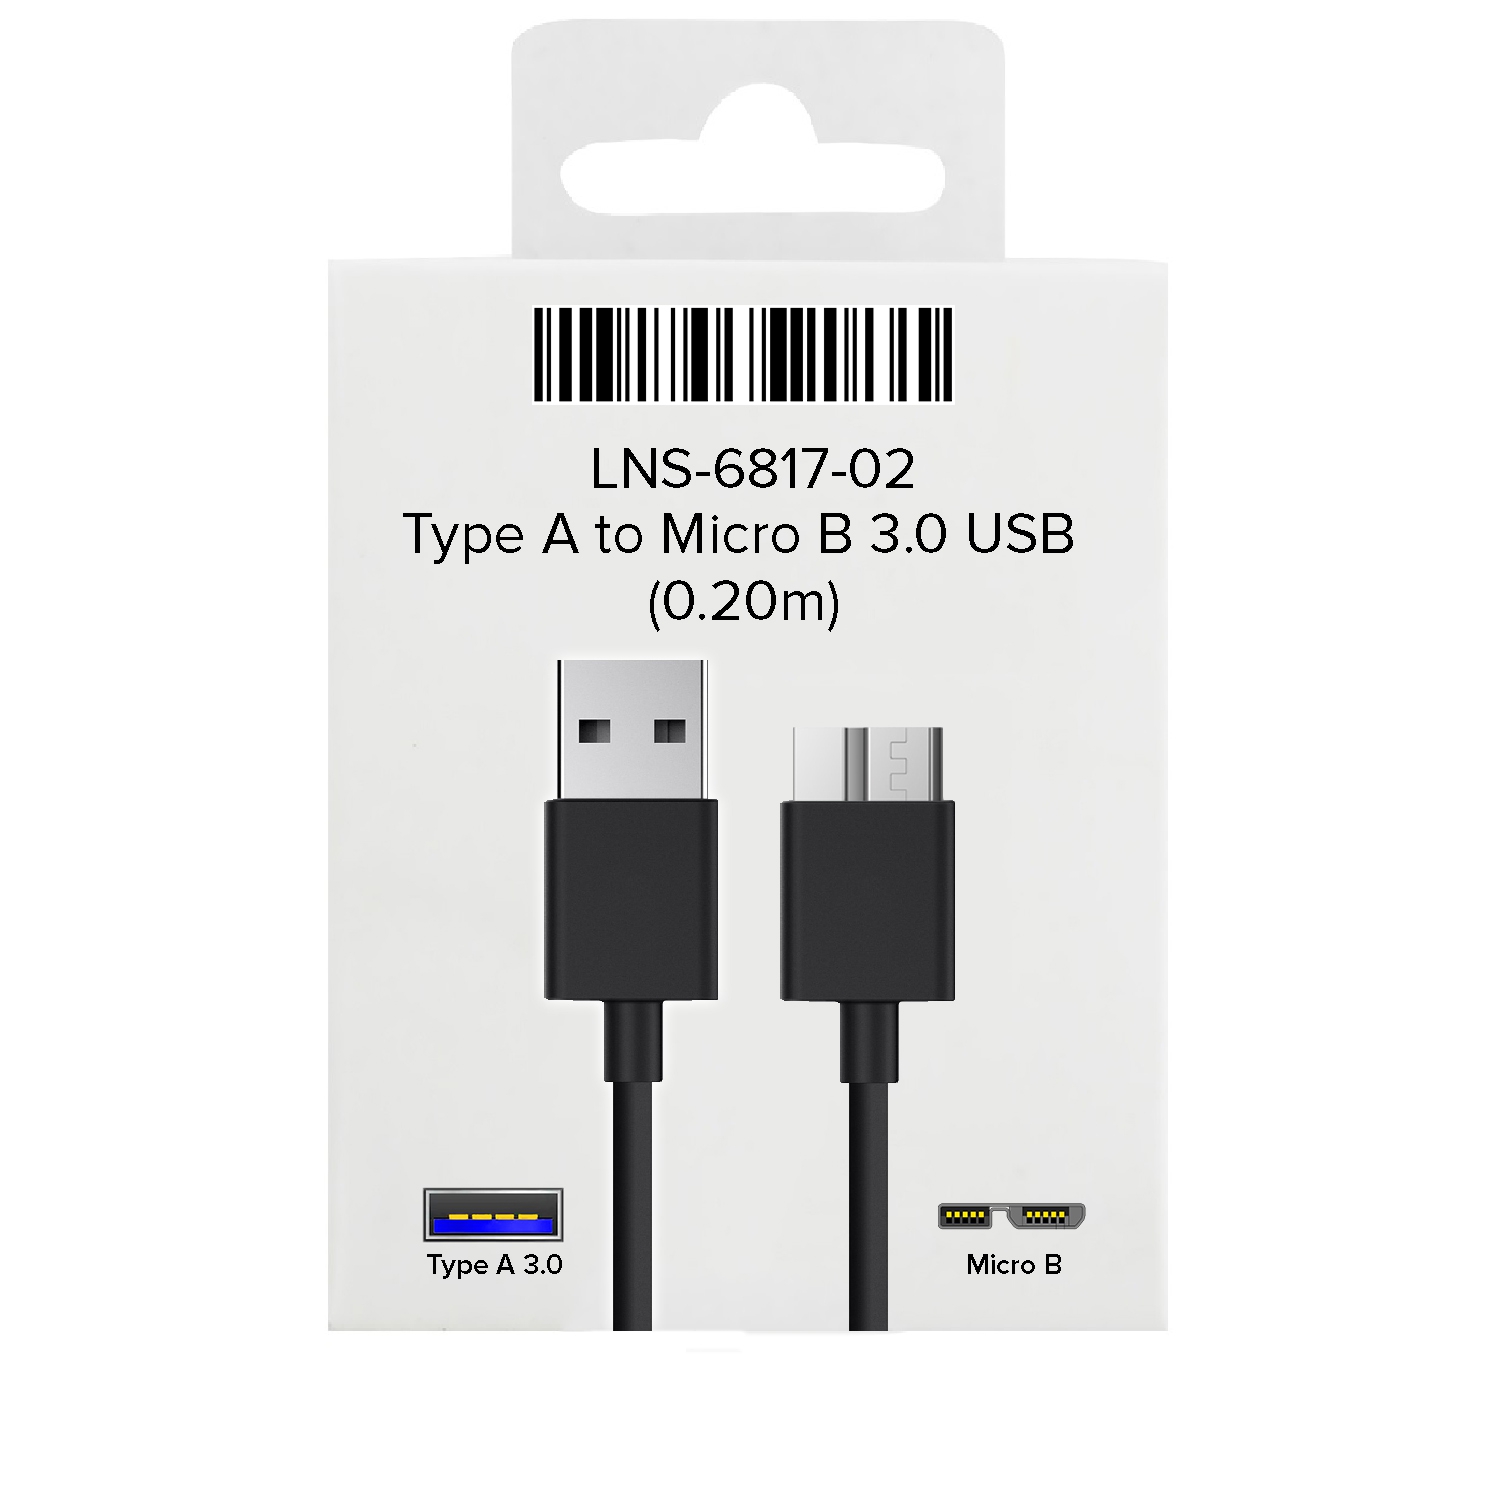 Type A to Micro B 3.0 USB 0.20M